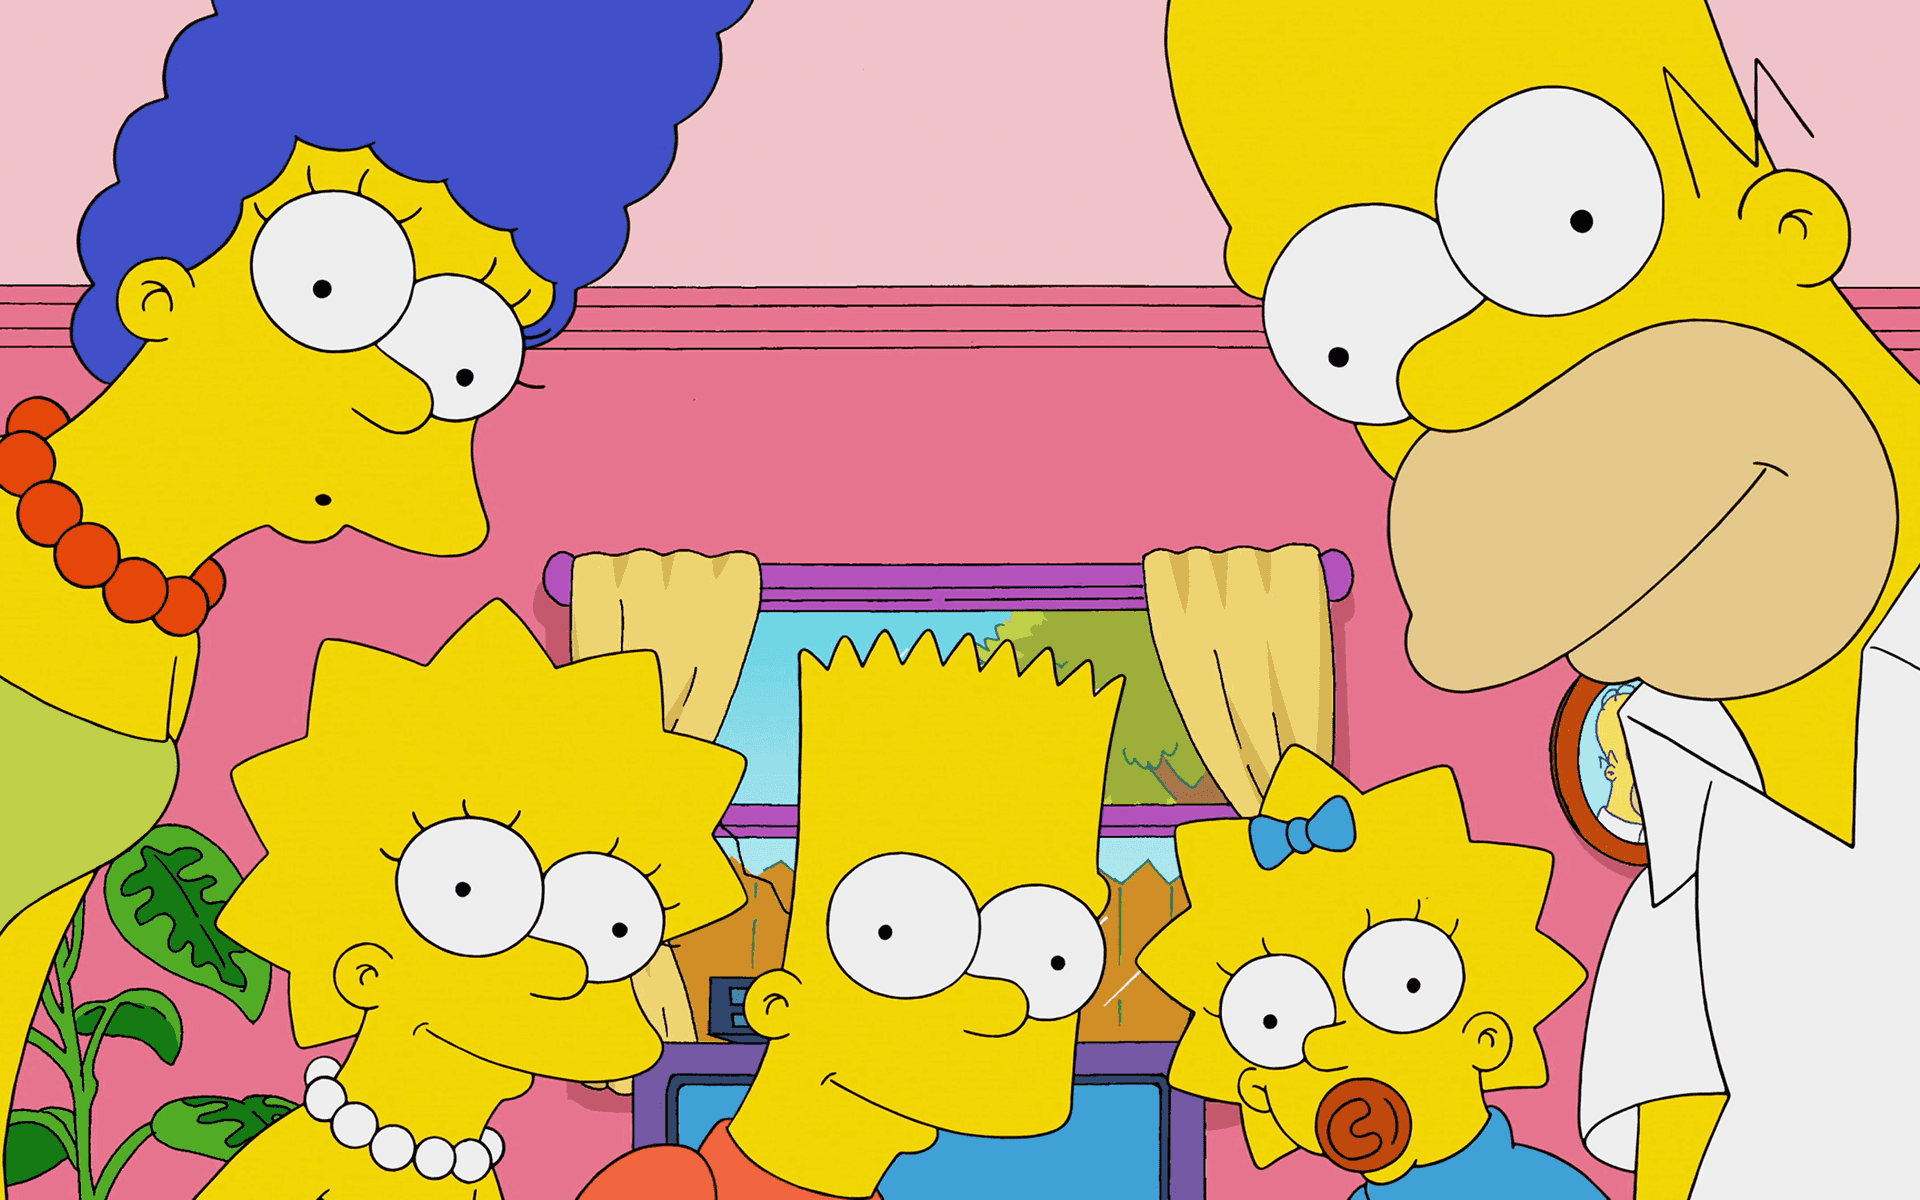 The Iconic Yellow Simpsons Family Watching Tv